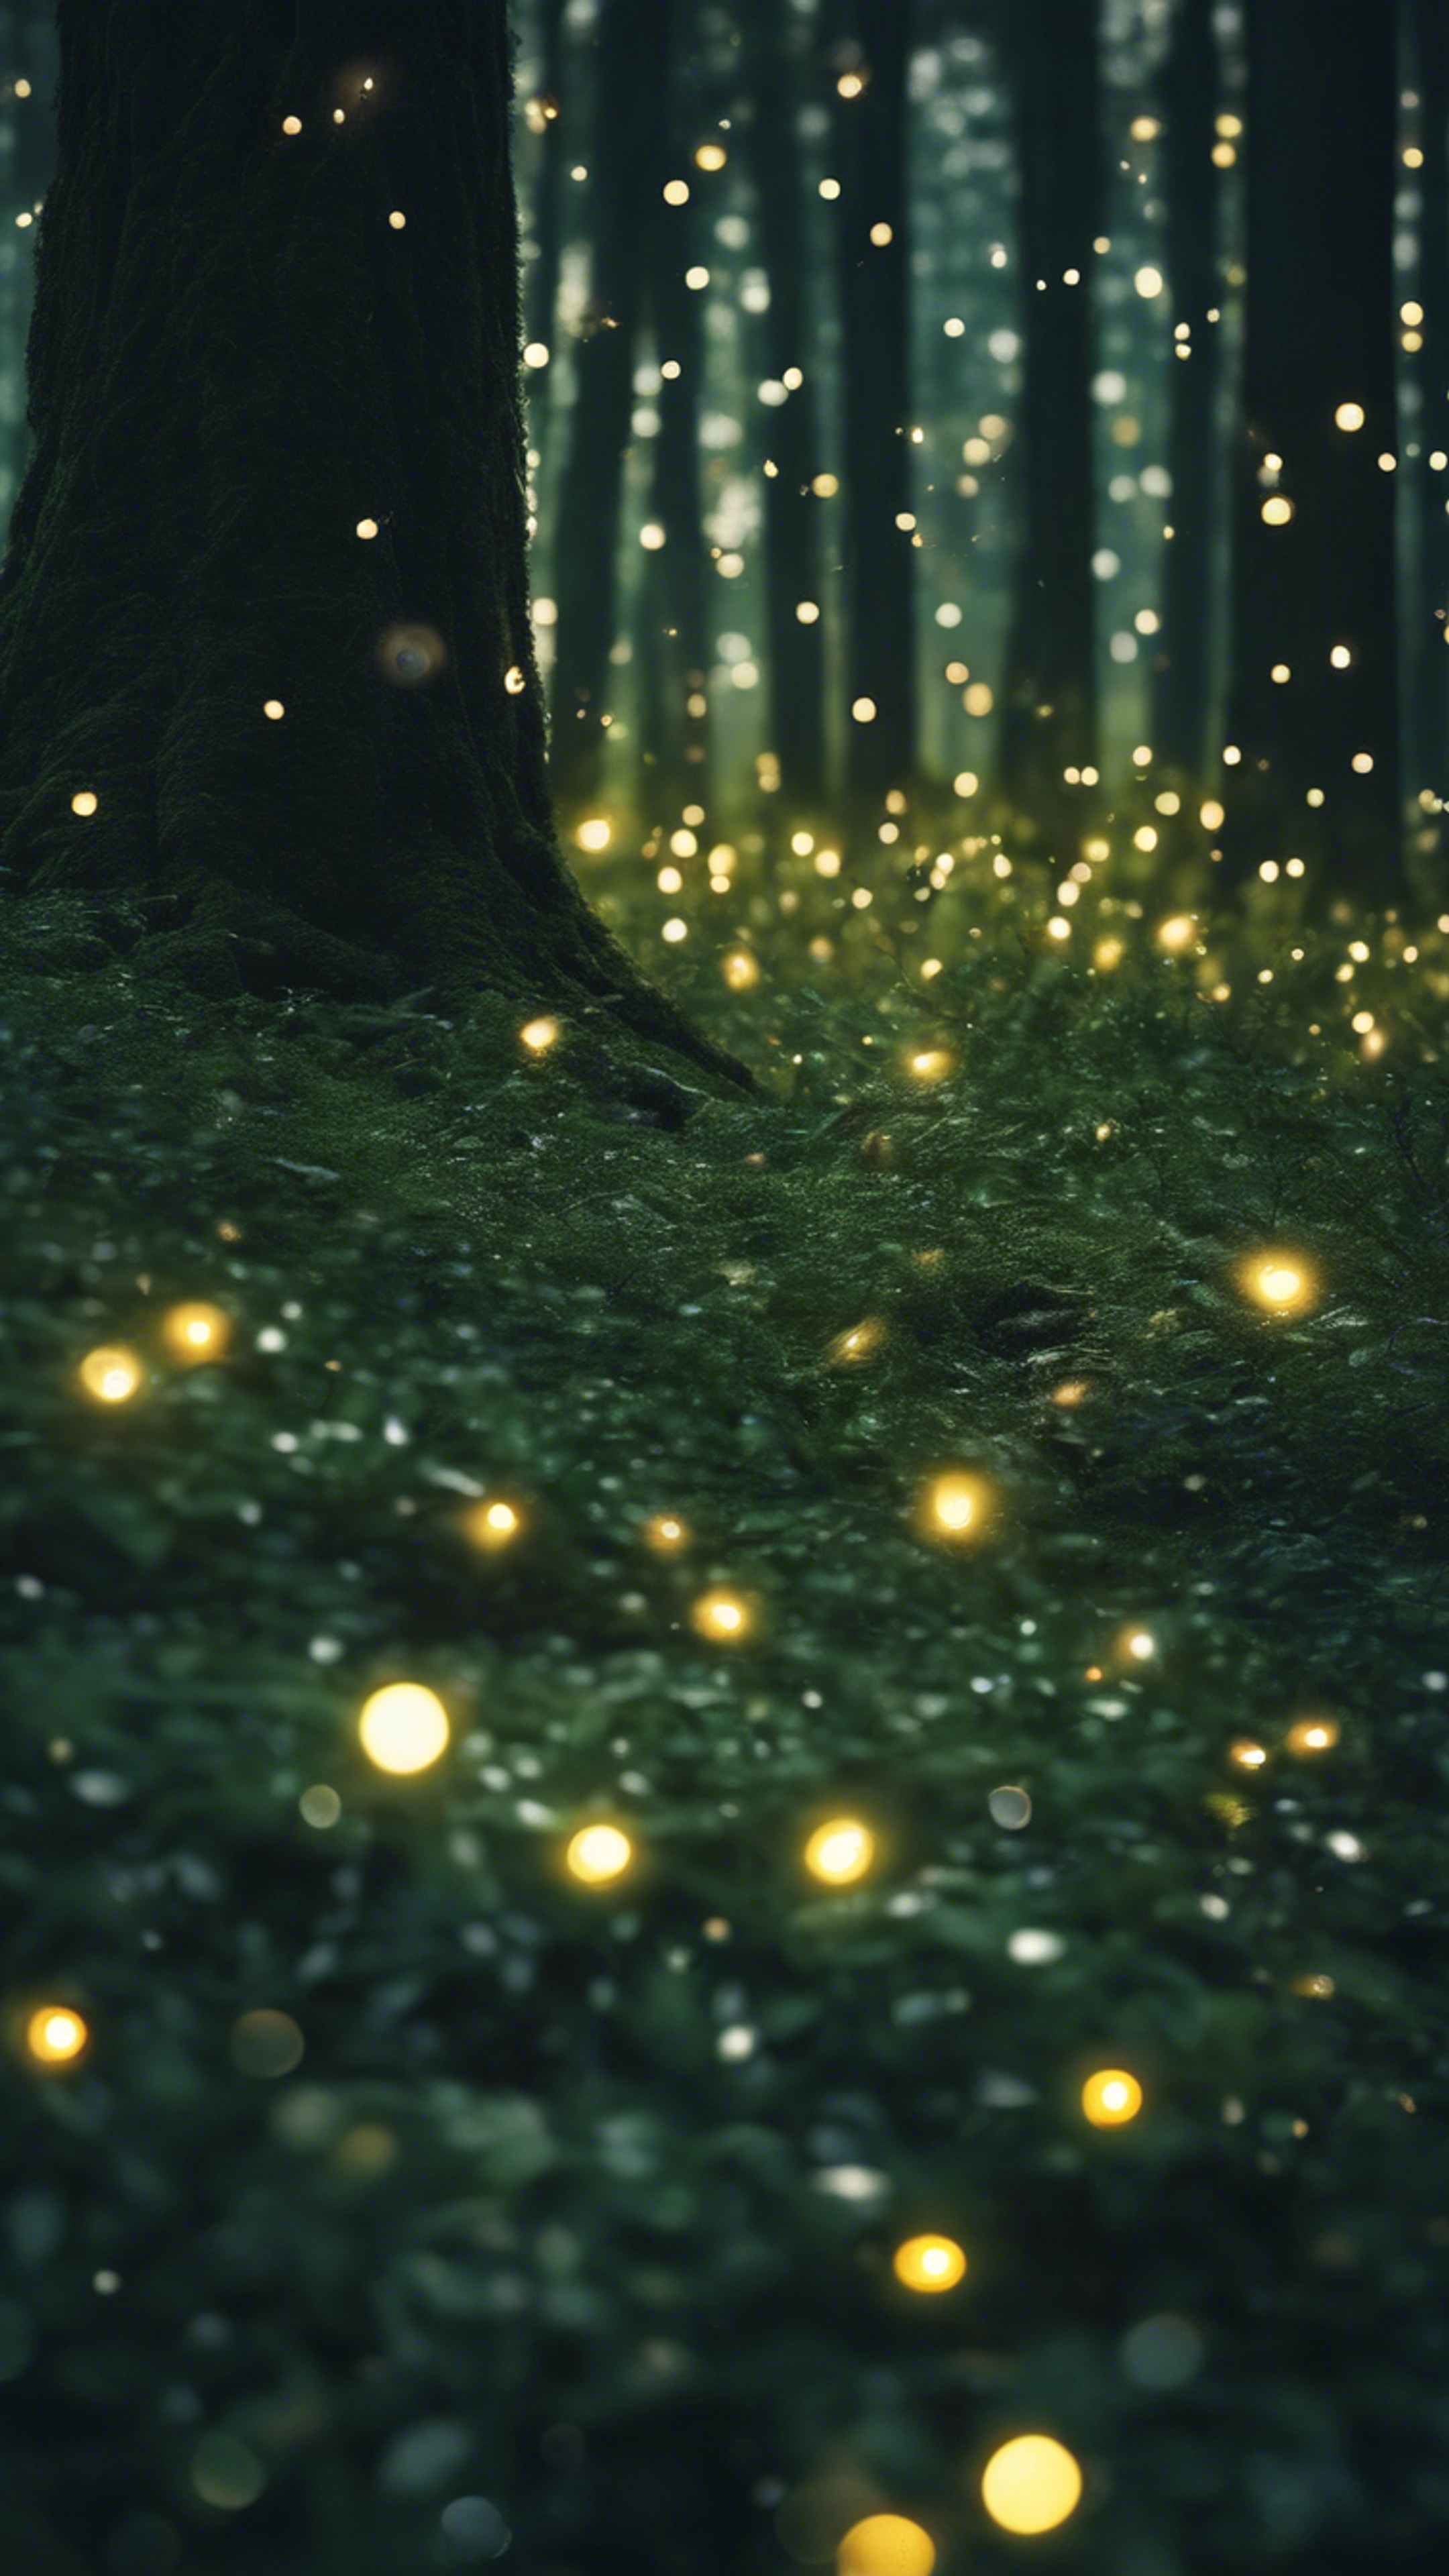 A dark green forest in the twilights, flecked with shimmering fireflies. Tapet[48f2b28e2b5742fcbebf]